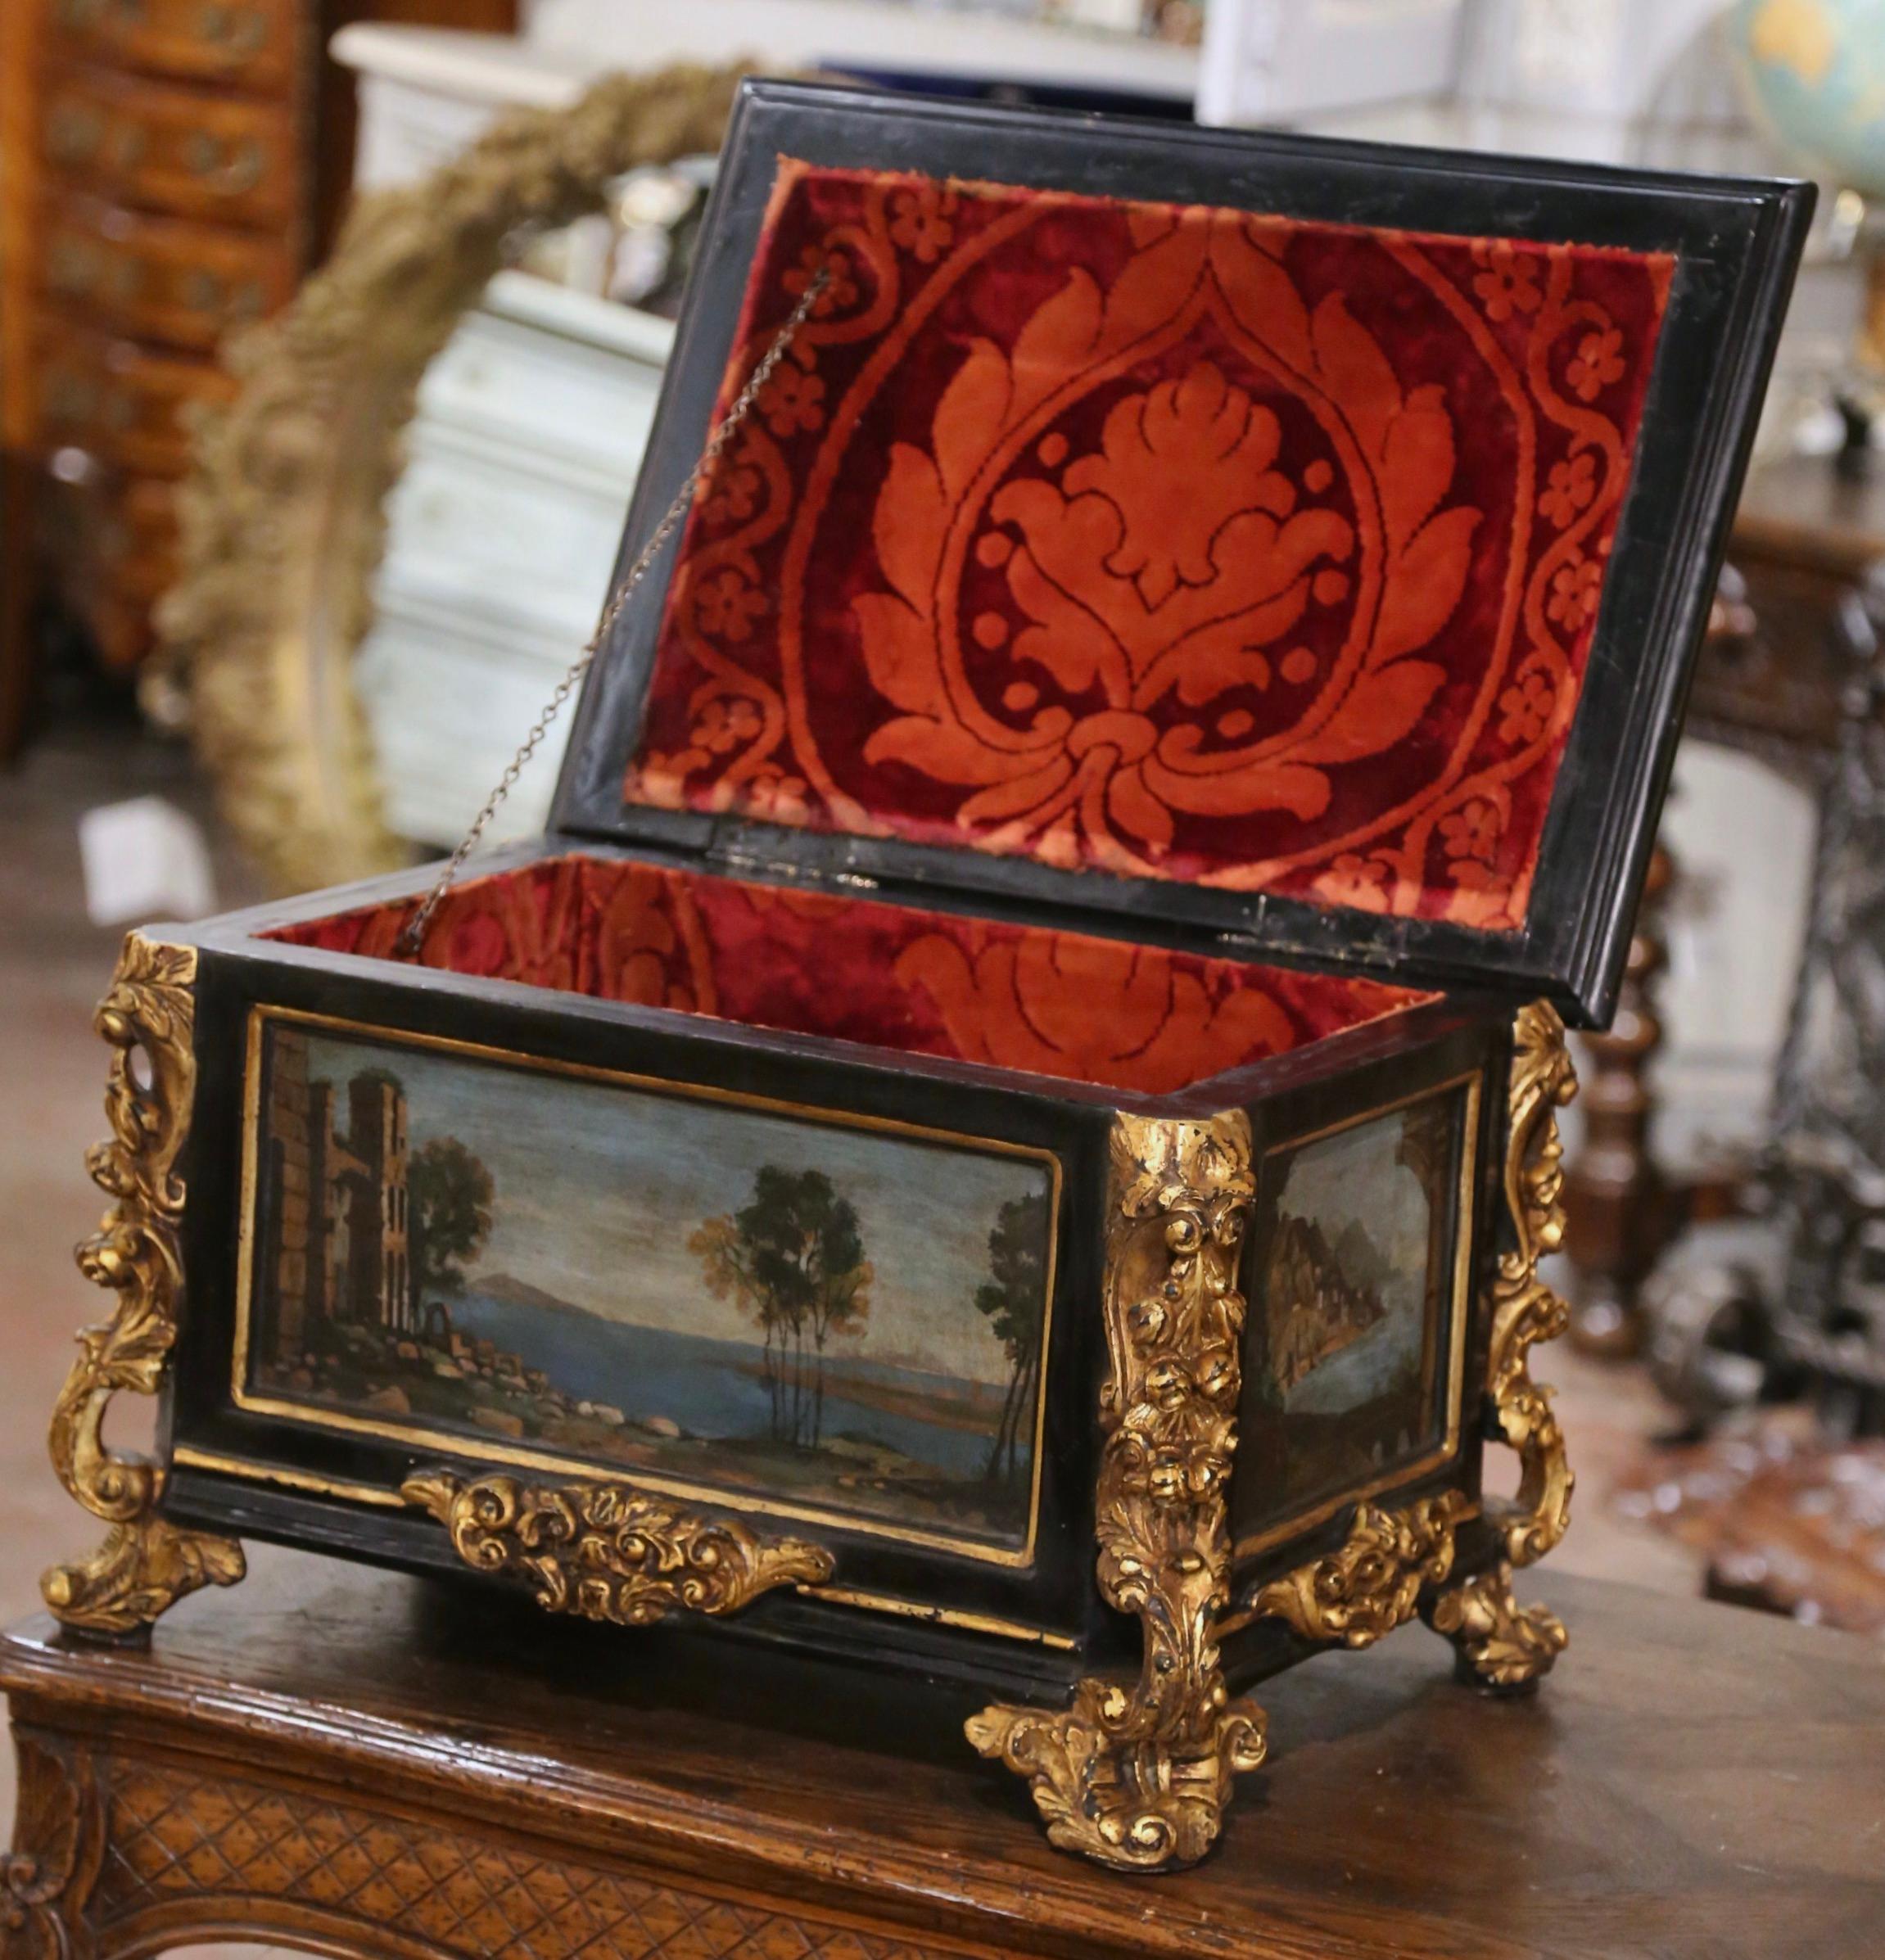 Decorate a coffee table or a shelf with this elegant and colorful casket. Crafted in Italy circa 1880, the Venetian box stands on heavily carved feet decorated with gilt acanthus leaf motifs, over a straight apron embellished with a center floral